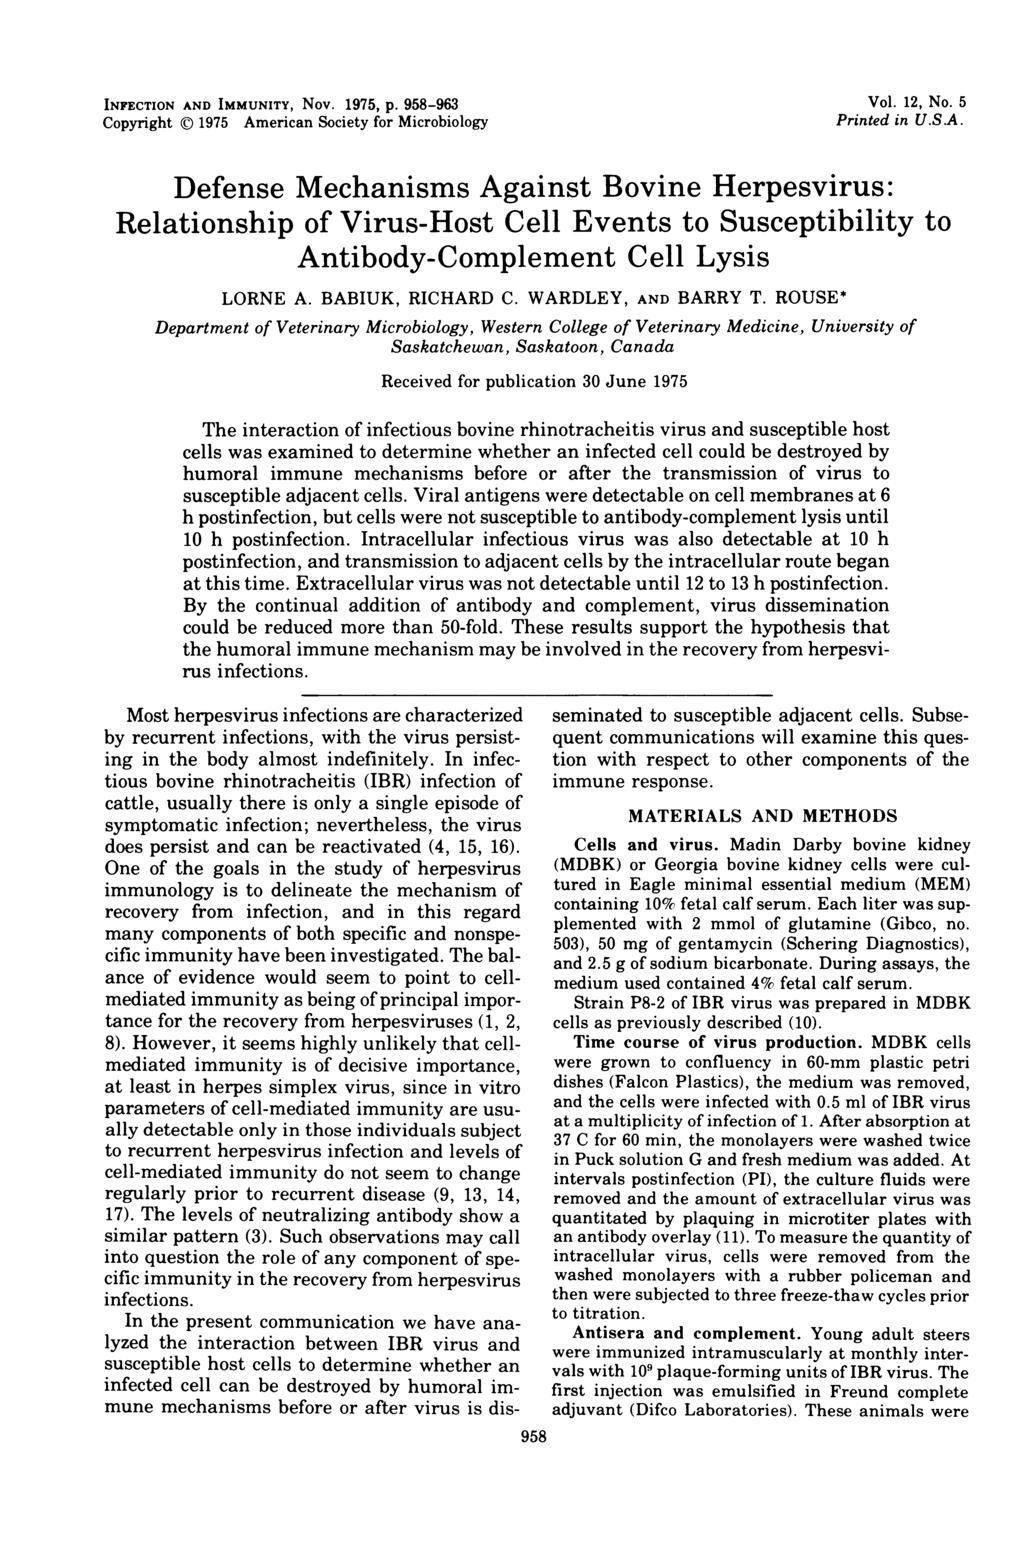 INFECTION AND IMMUNITY, Nov. 1975, p. 958-963 Copyright 1975 American Society for Microbiology Vol. 12, No. 5 Printed in USA.